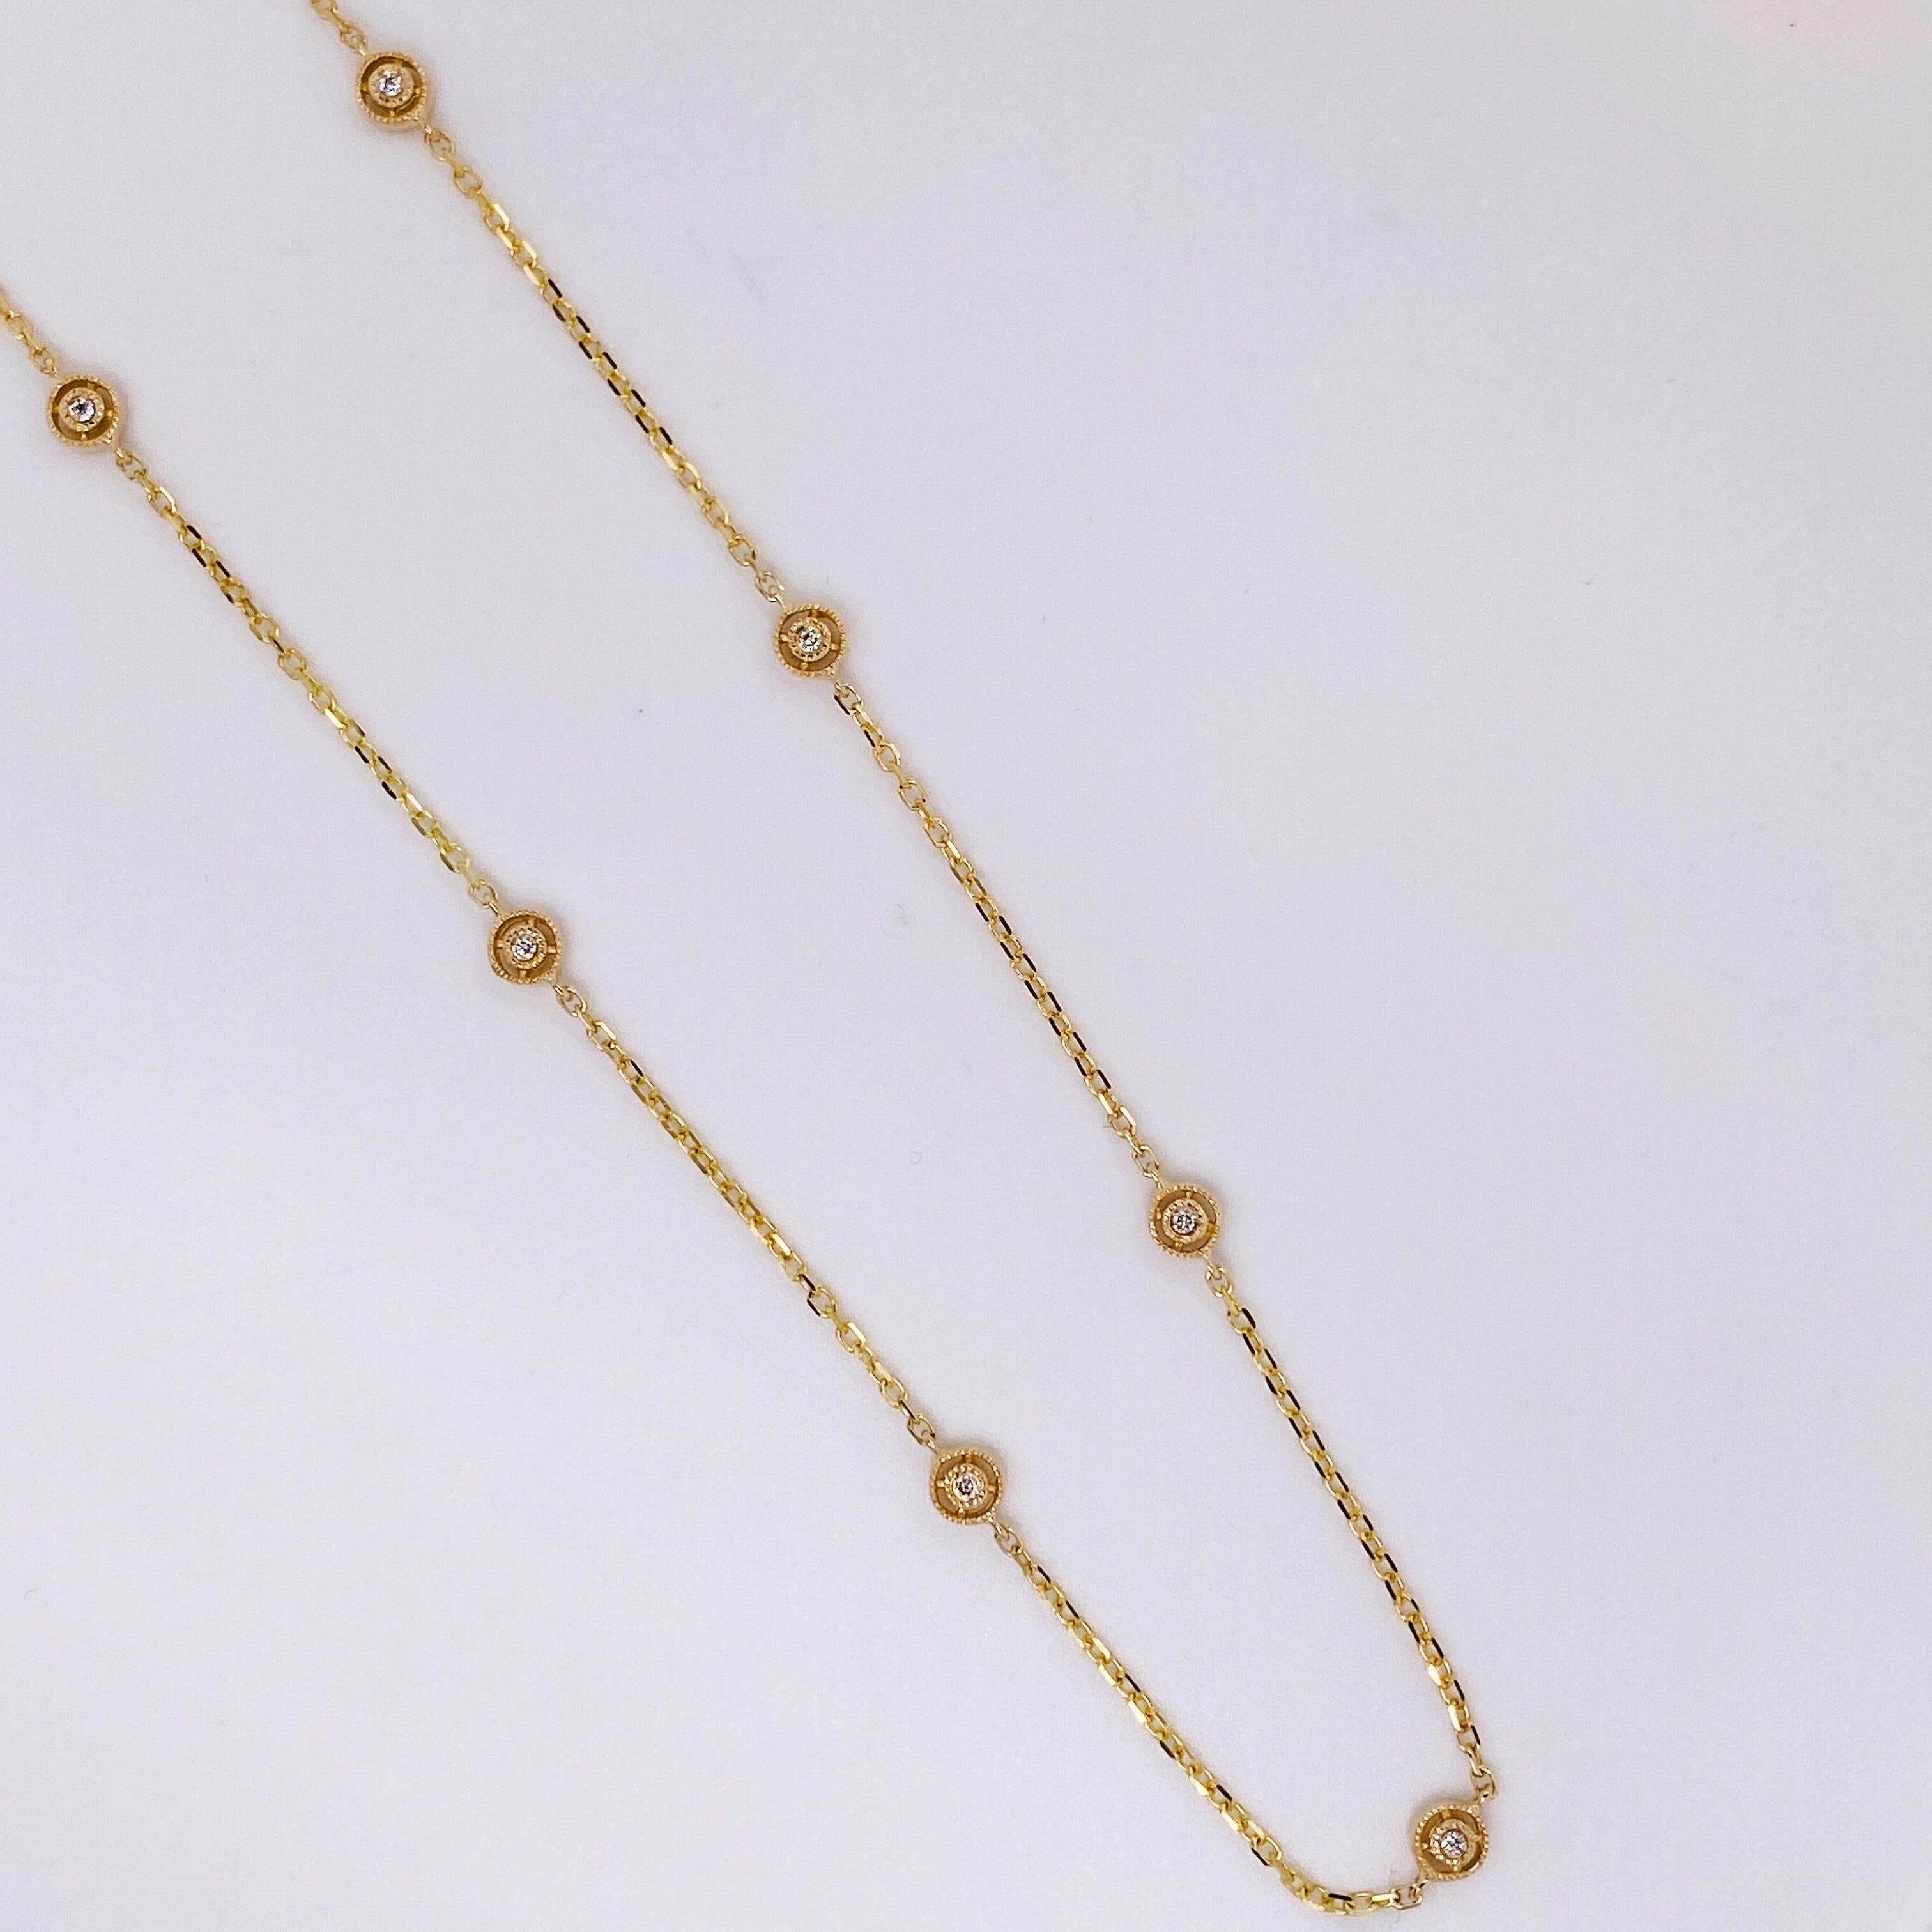 This diamonds by the yard necklace has 7 diamonds that are spaced out on a cable chain. The 18 inch chain has a unique design with a satellite design around each diamond. There is a beaded design around each diamond. The entire necklace is 14 karat